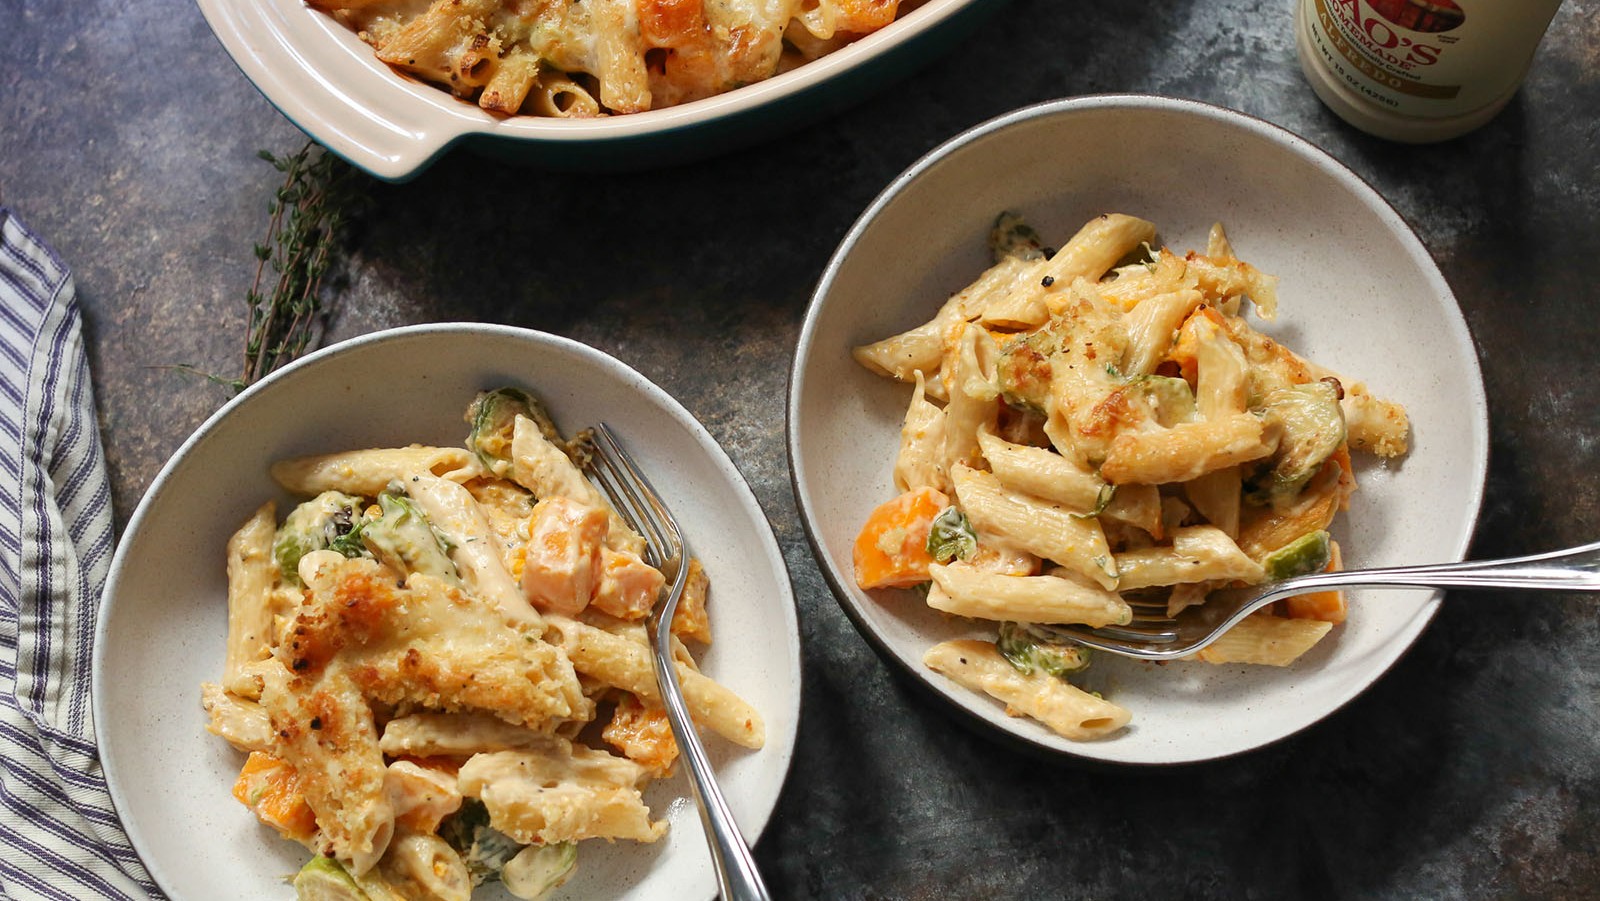 Image of Serena Wolf’s Baked Penne Alfredo with Butternut Squash and Brussels Sprouts